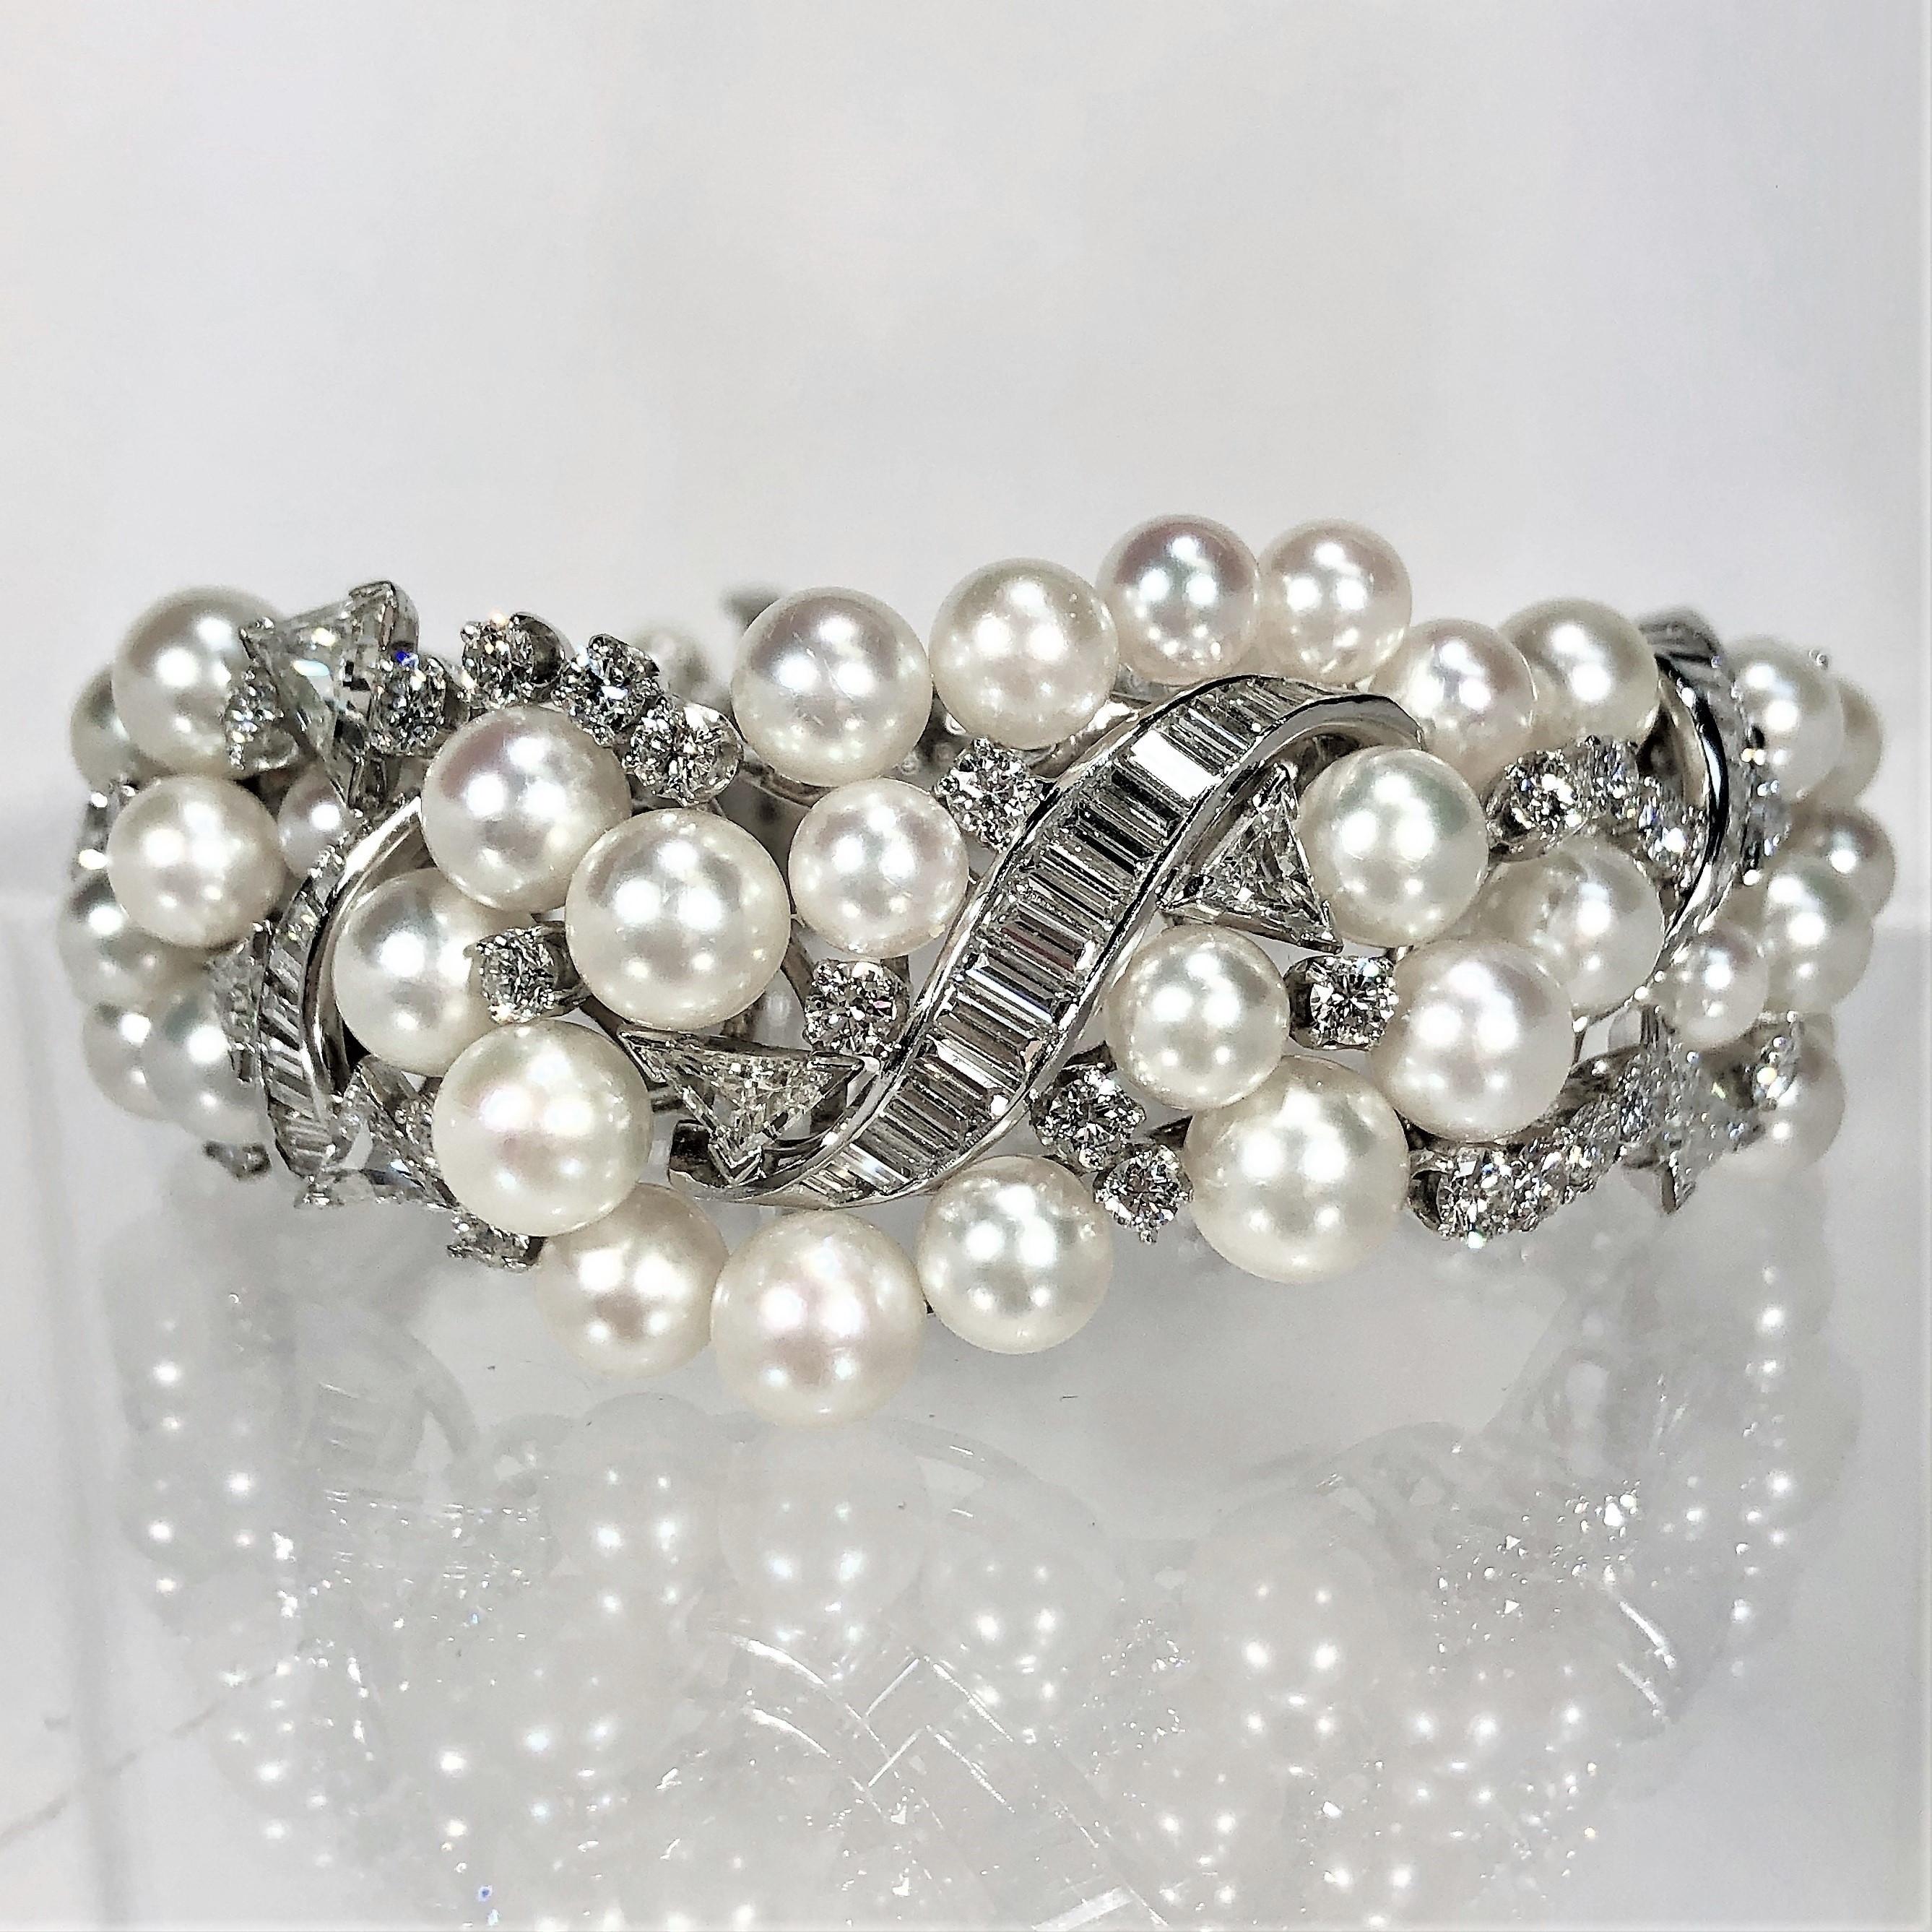 Hand crafted in platinum, this beautiful 1950s bombee pearl and diamond
cocktail bracelet graduates from 1 1/16 inch at the widest point in the front,
down to 9/16 inch wide at the back, by the clasp. The cultured pearls
are very fine quality